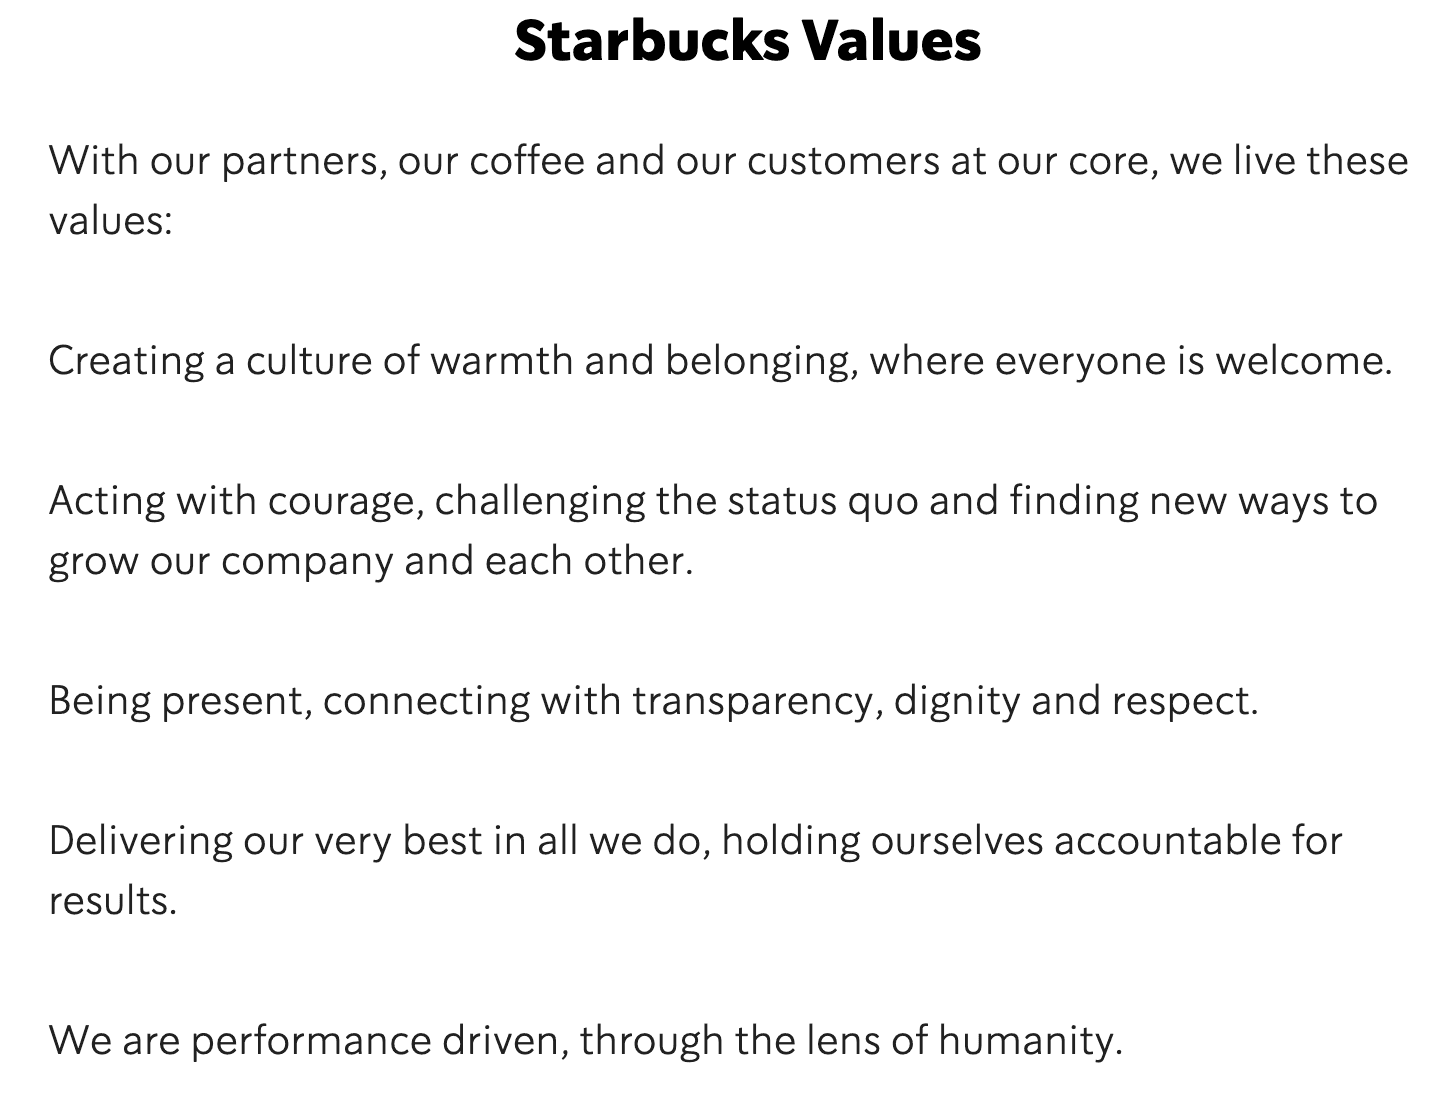 Starbucks states they live five values that are listed.